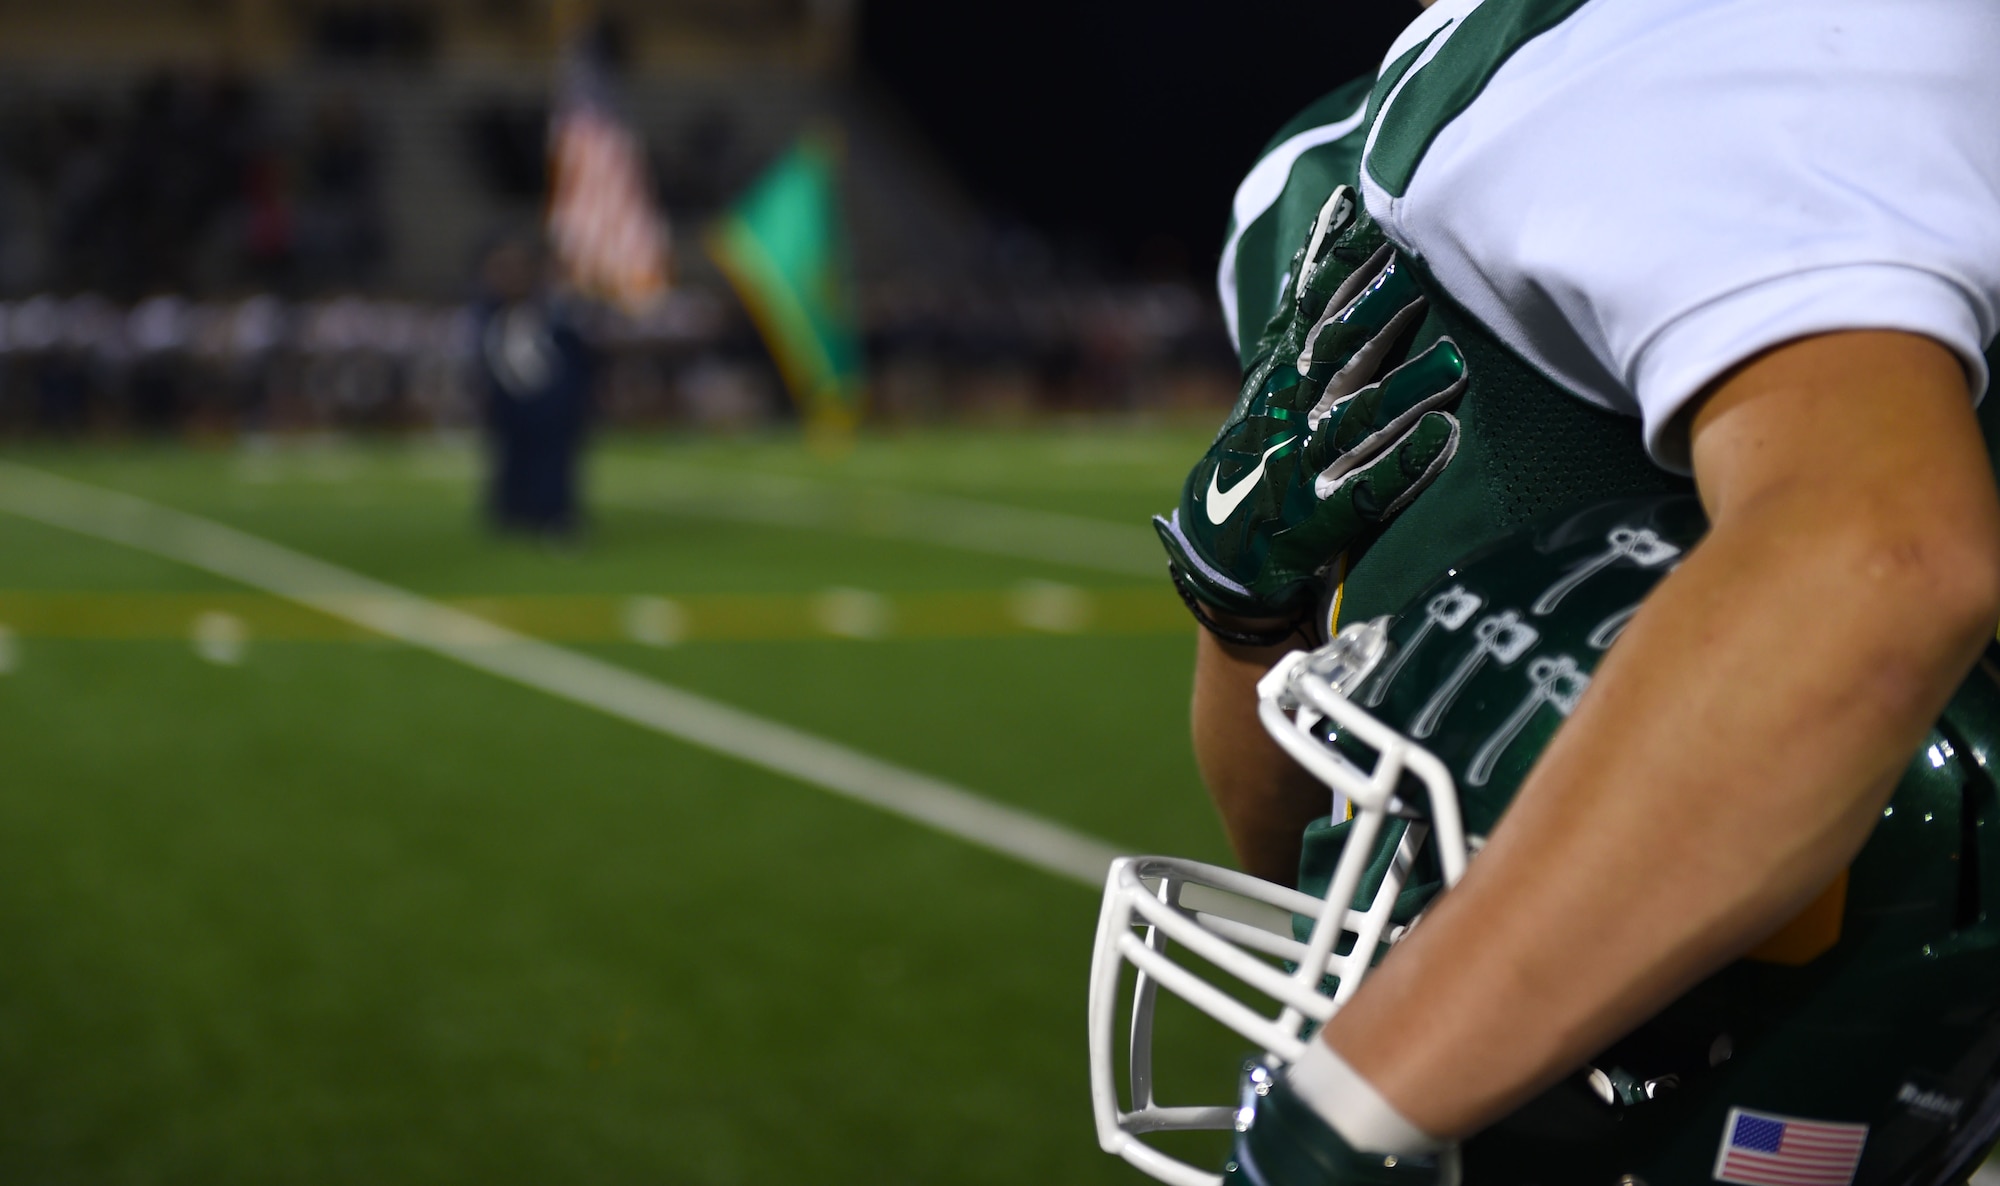 A Clover Park High School football team player puts his hand over his heart during the National Anthem and presentation of the colors prior to the Warrior’s game against River Ridge High School Oct. 16, 2015 in Lakewood, Wash. The Warriors recognized three McChord Airmen for their service to others as a part of their desire to honor “warriors” of the community. (U.S. Air Force photo/Senior Airman Naomi Griego)